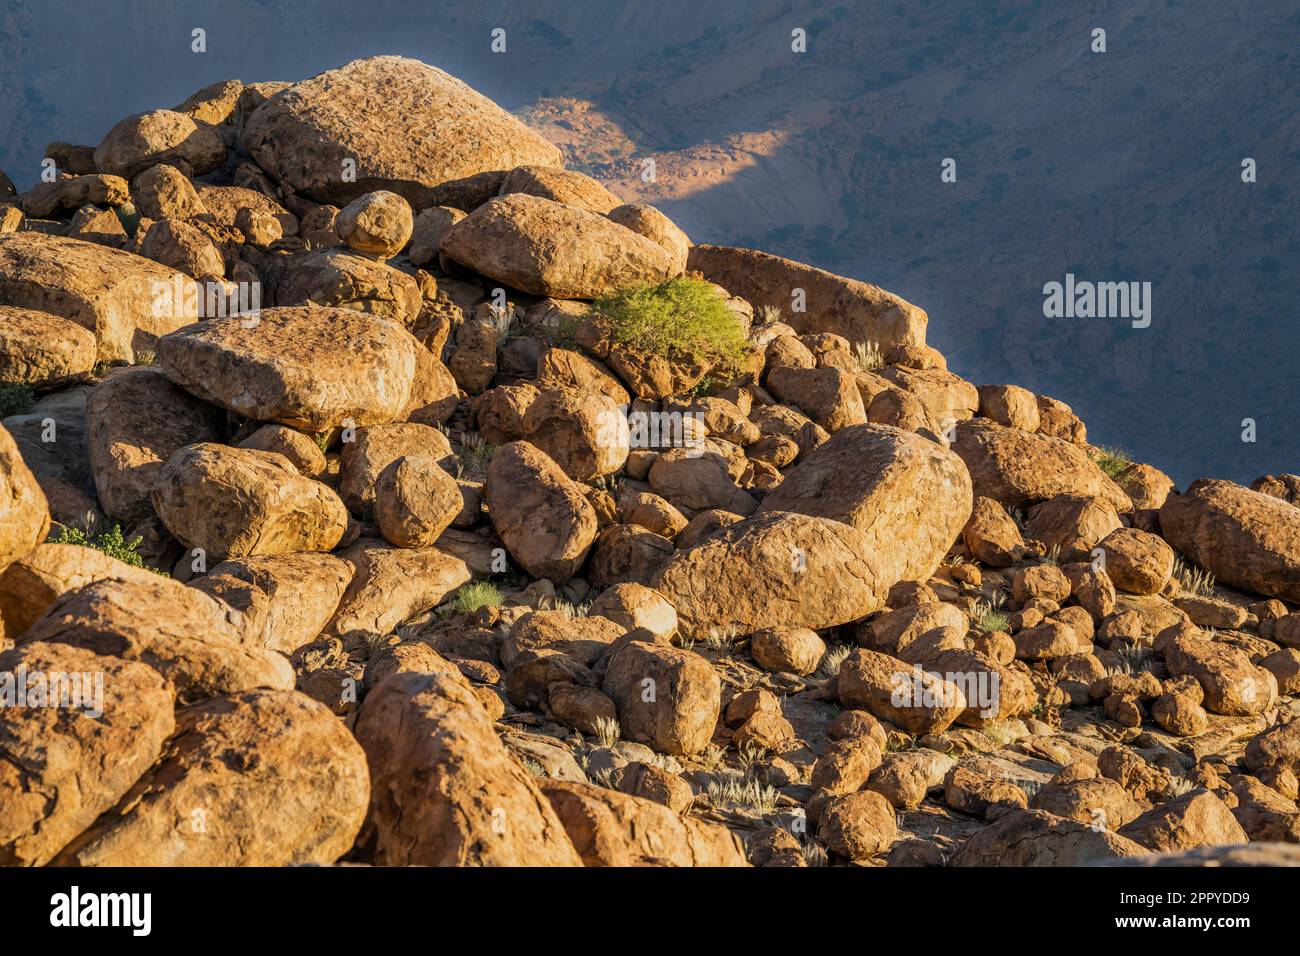 Tree stands between rocks and boulders on a hill. Damaraland, Namibia, Africa Stock Photo